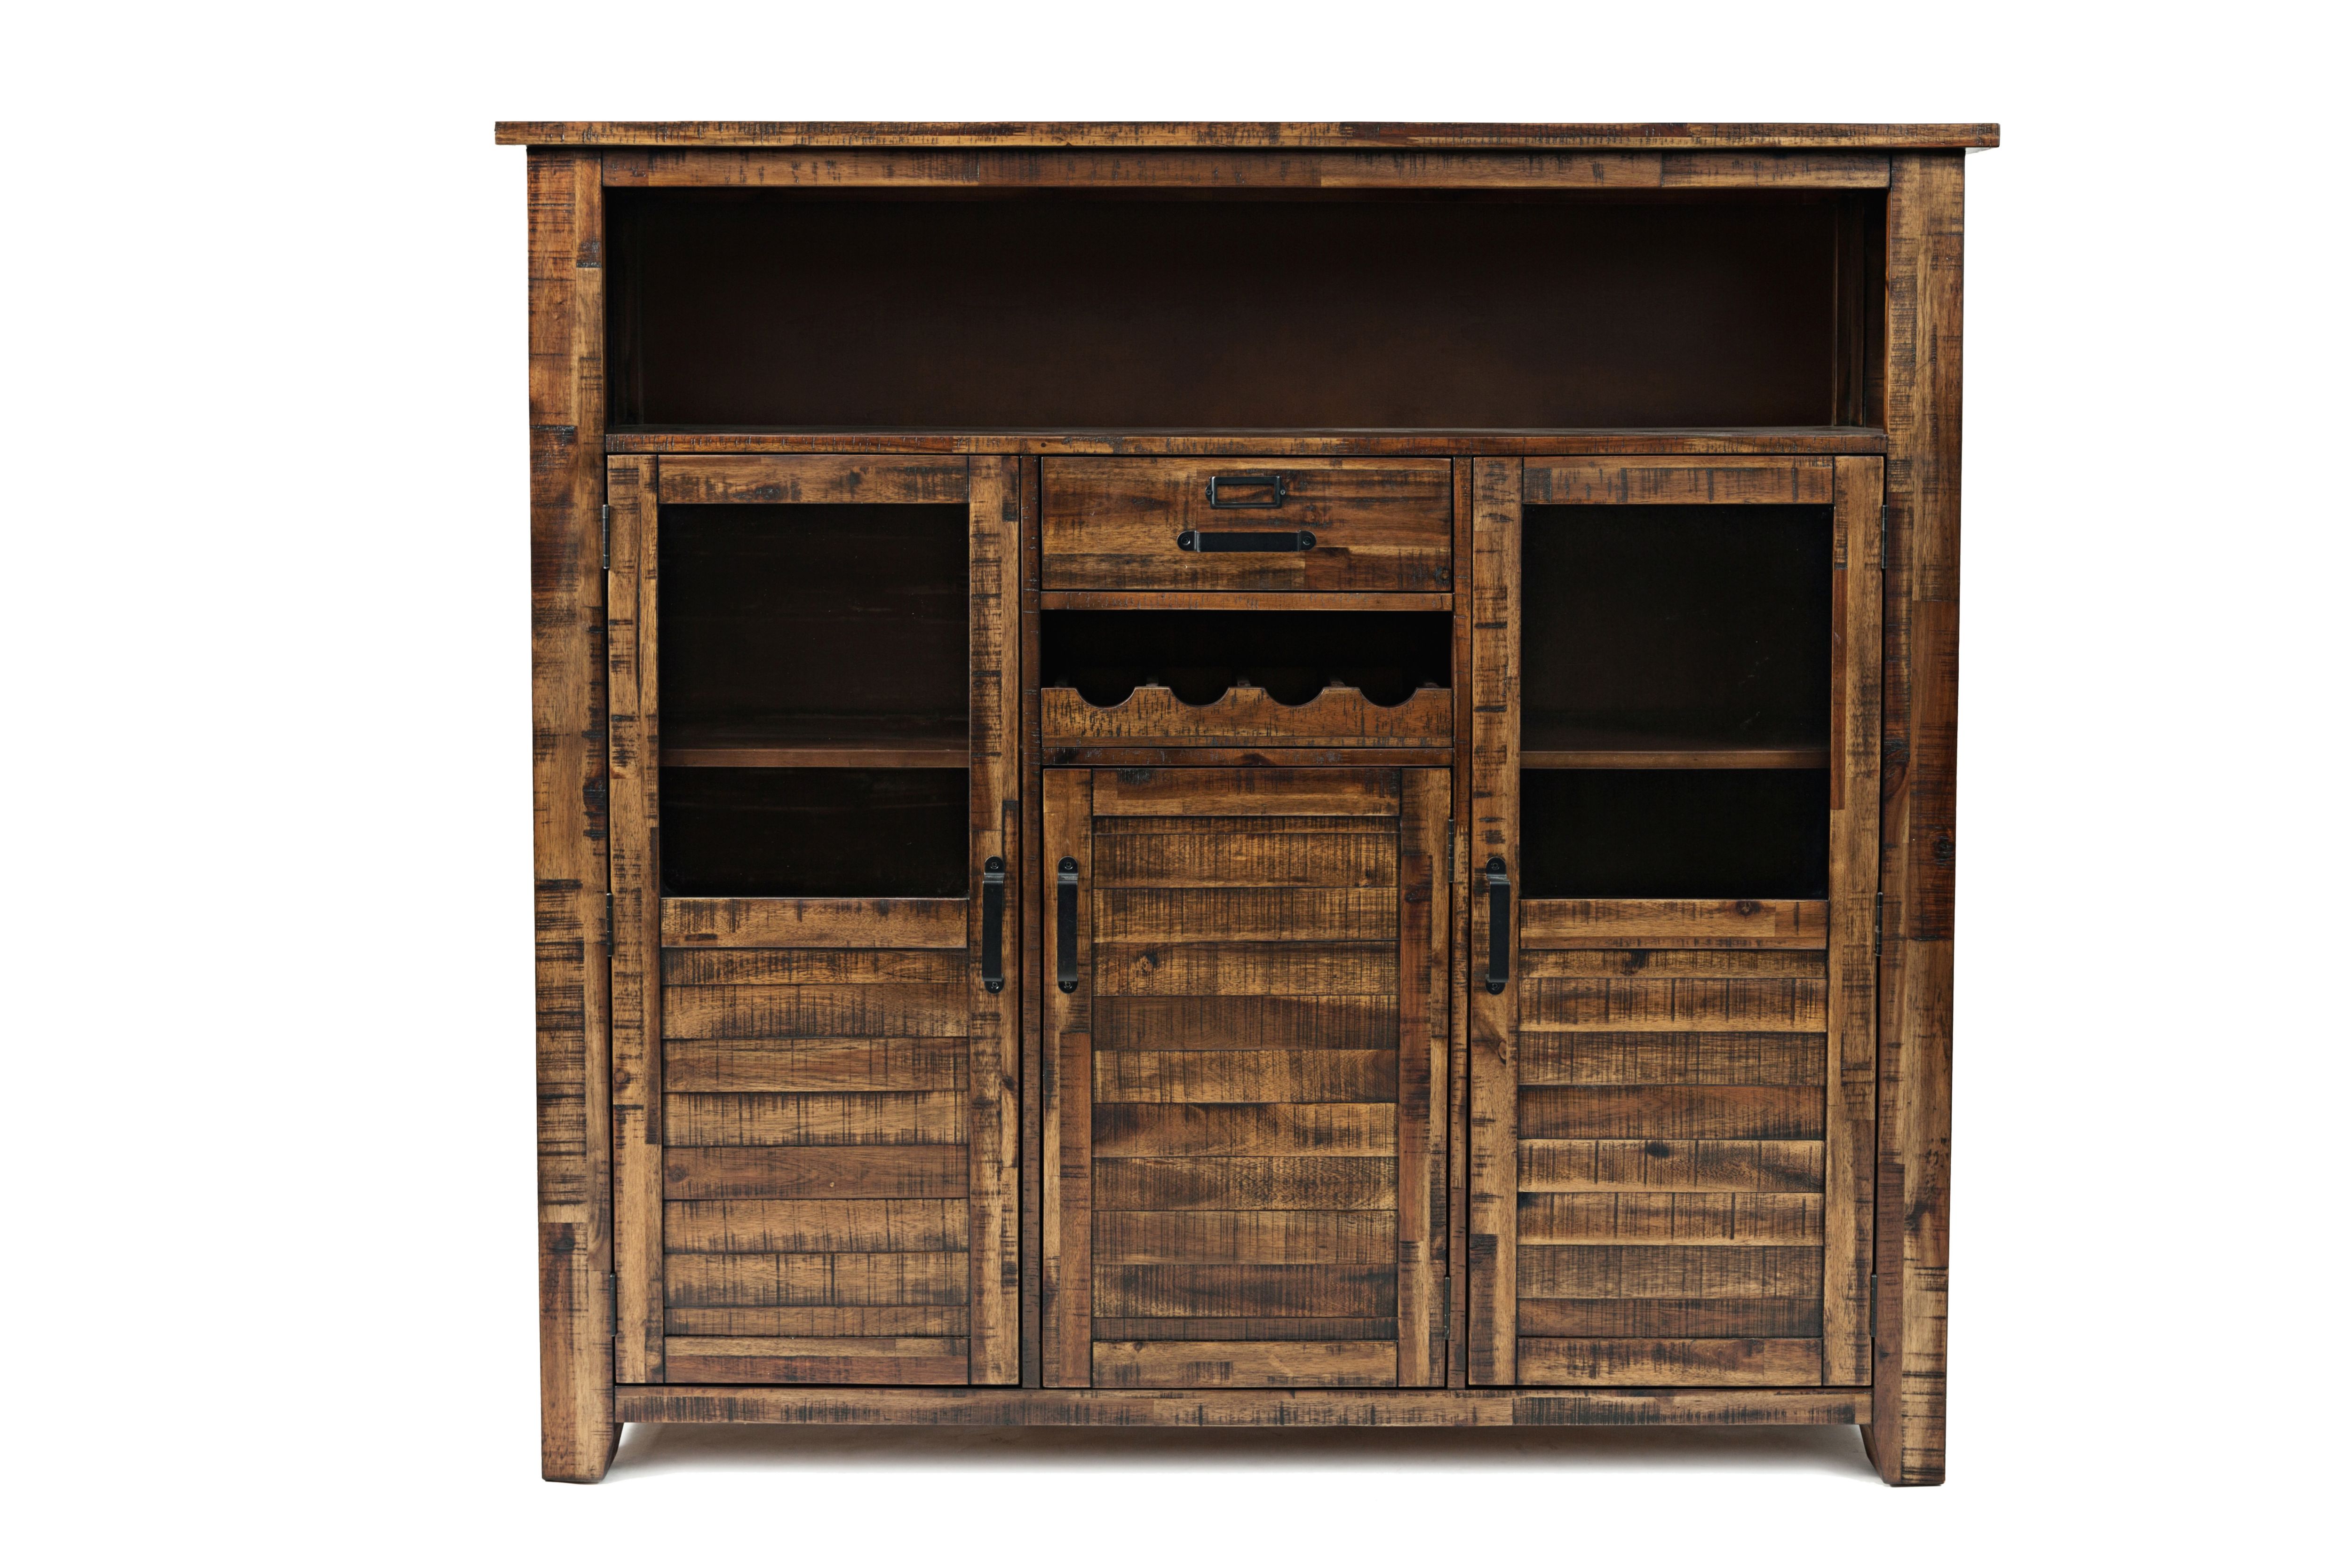 Cannon Valley Wine Cabinet